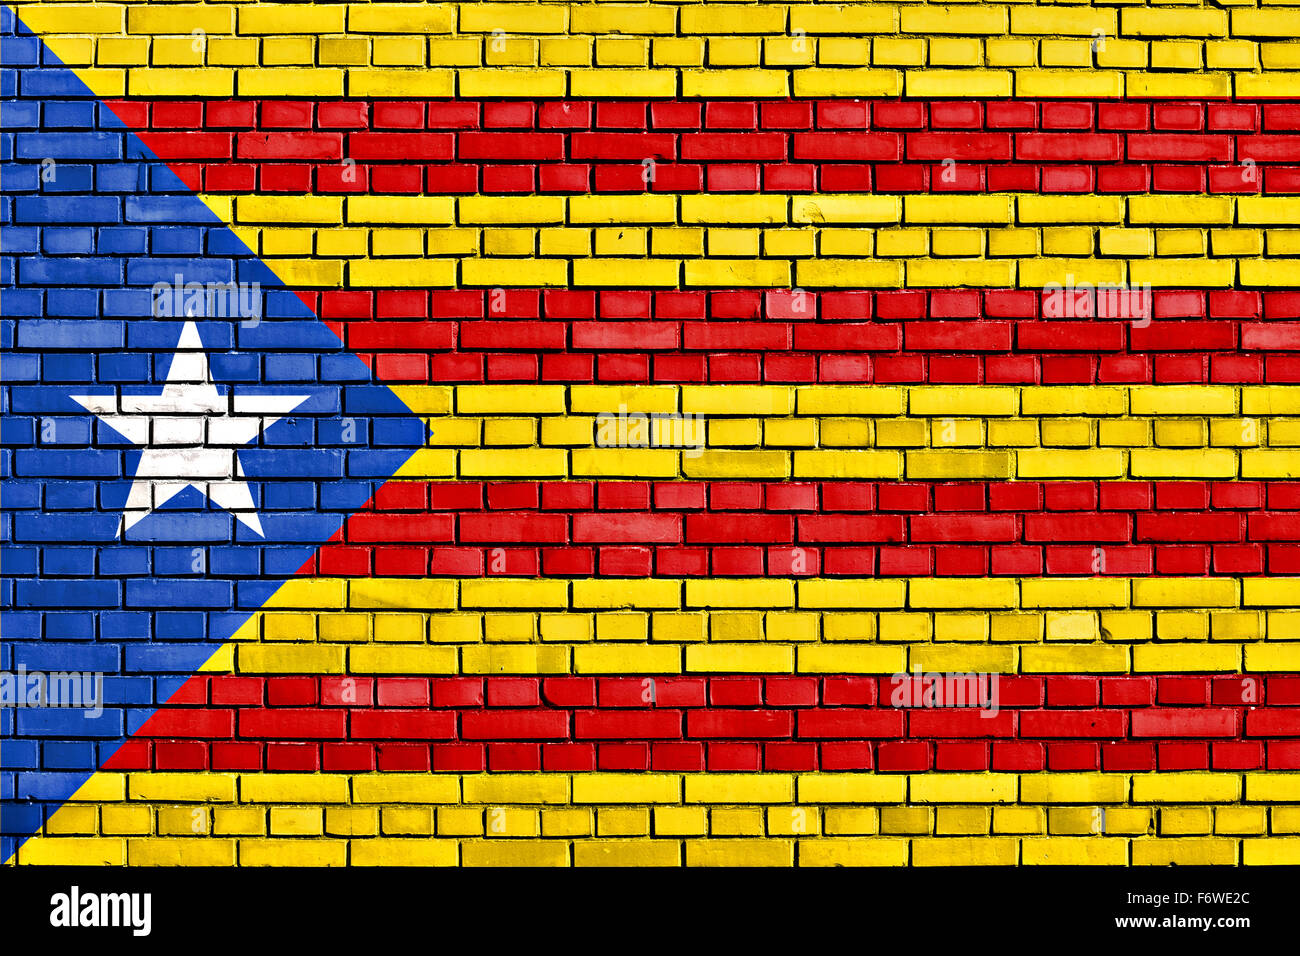 flag of Catalan independence movement painted on brick wall Stock Photo